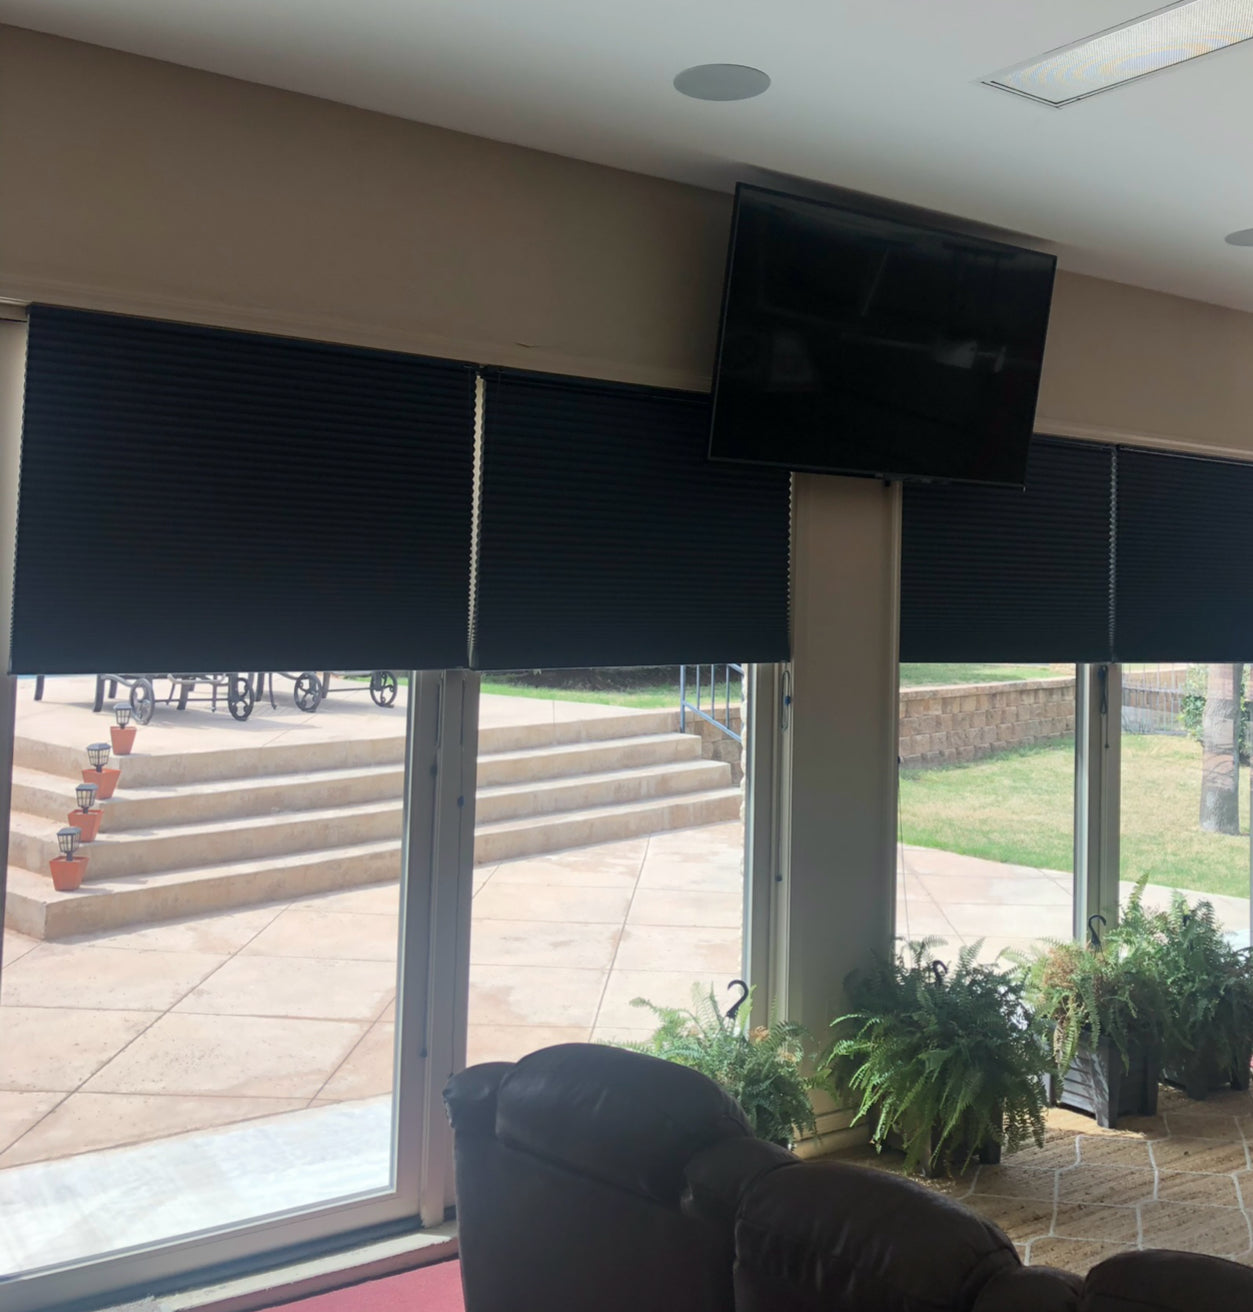 Cellular Shade Install Pictures